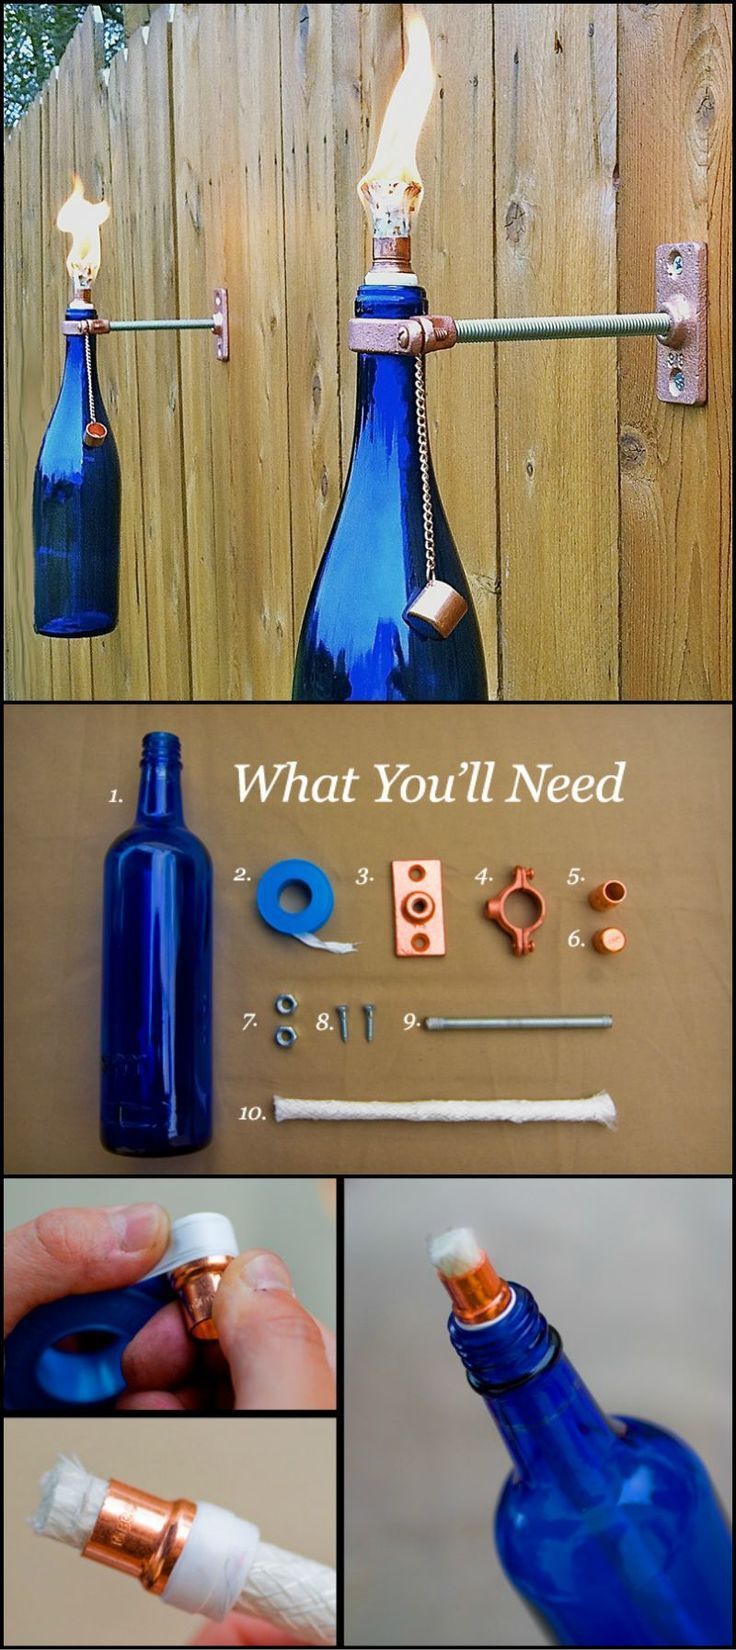 16 diy projects For Couples wine bottles ideas